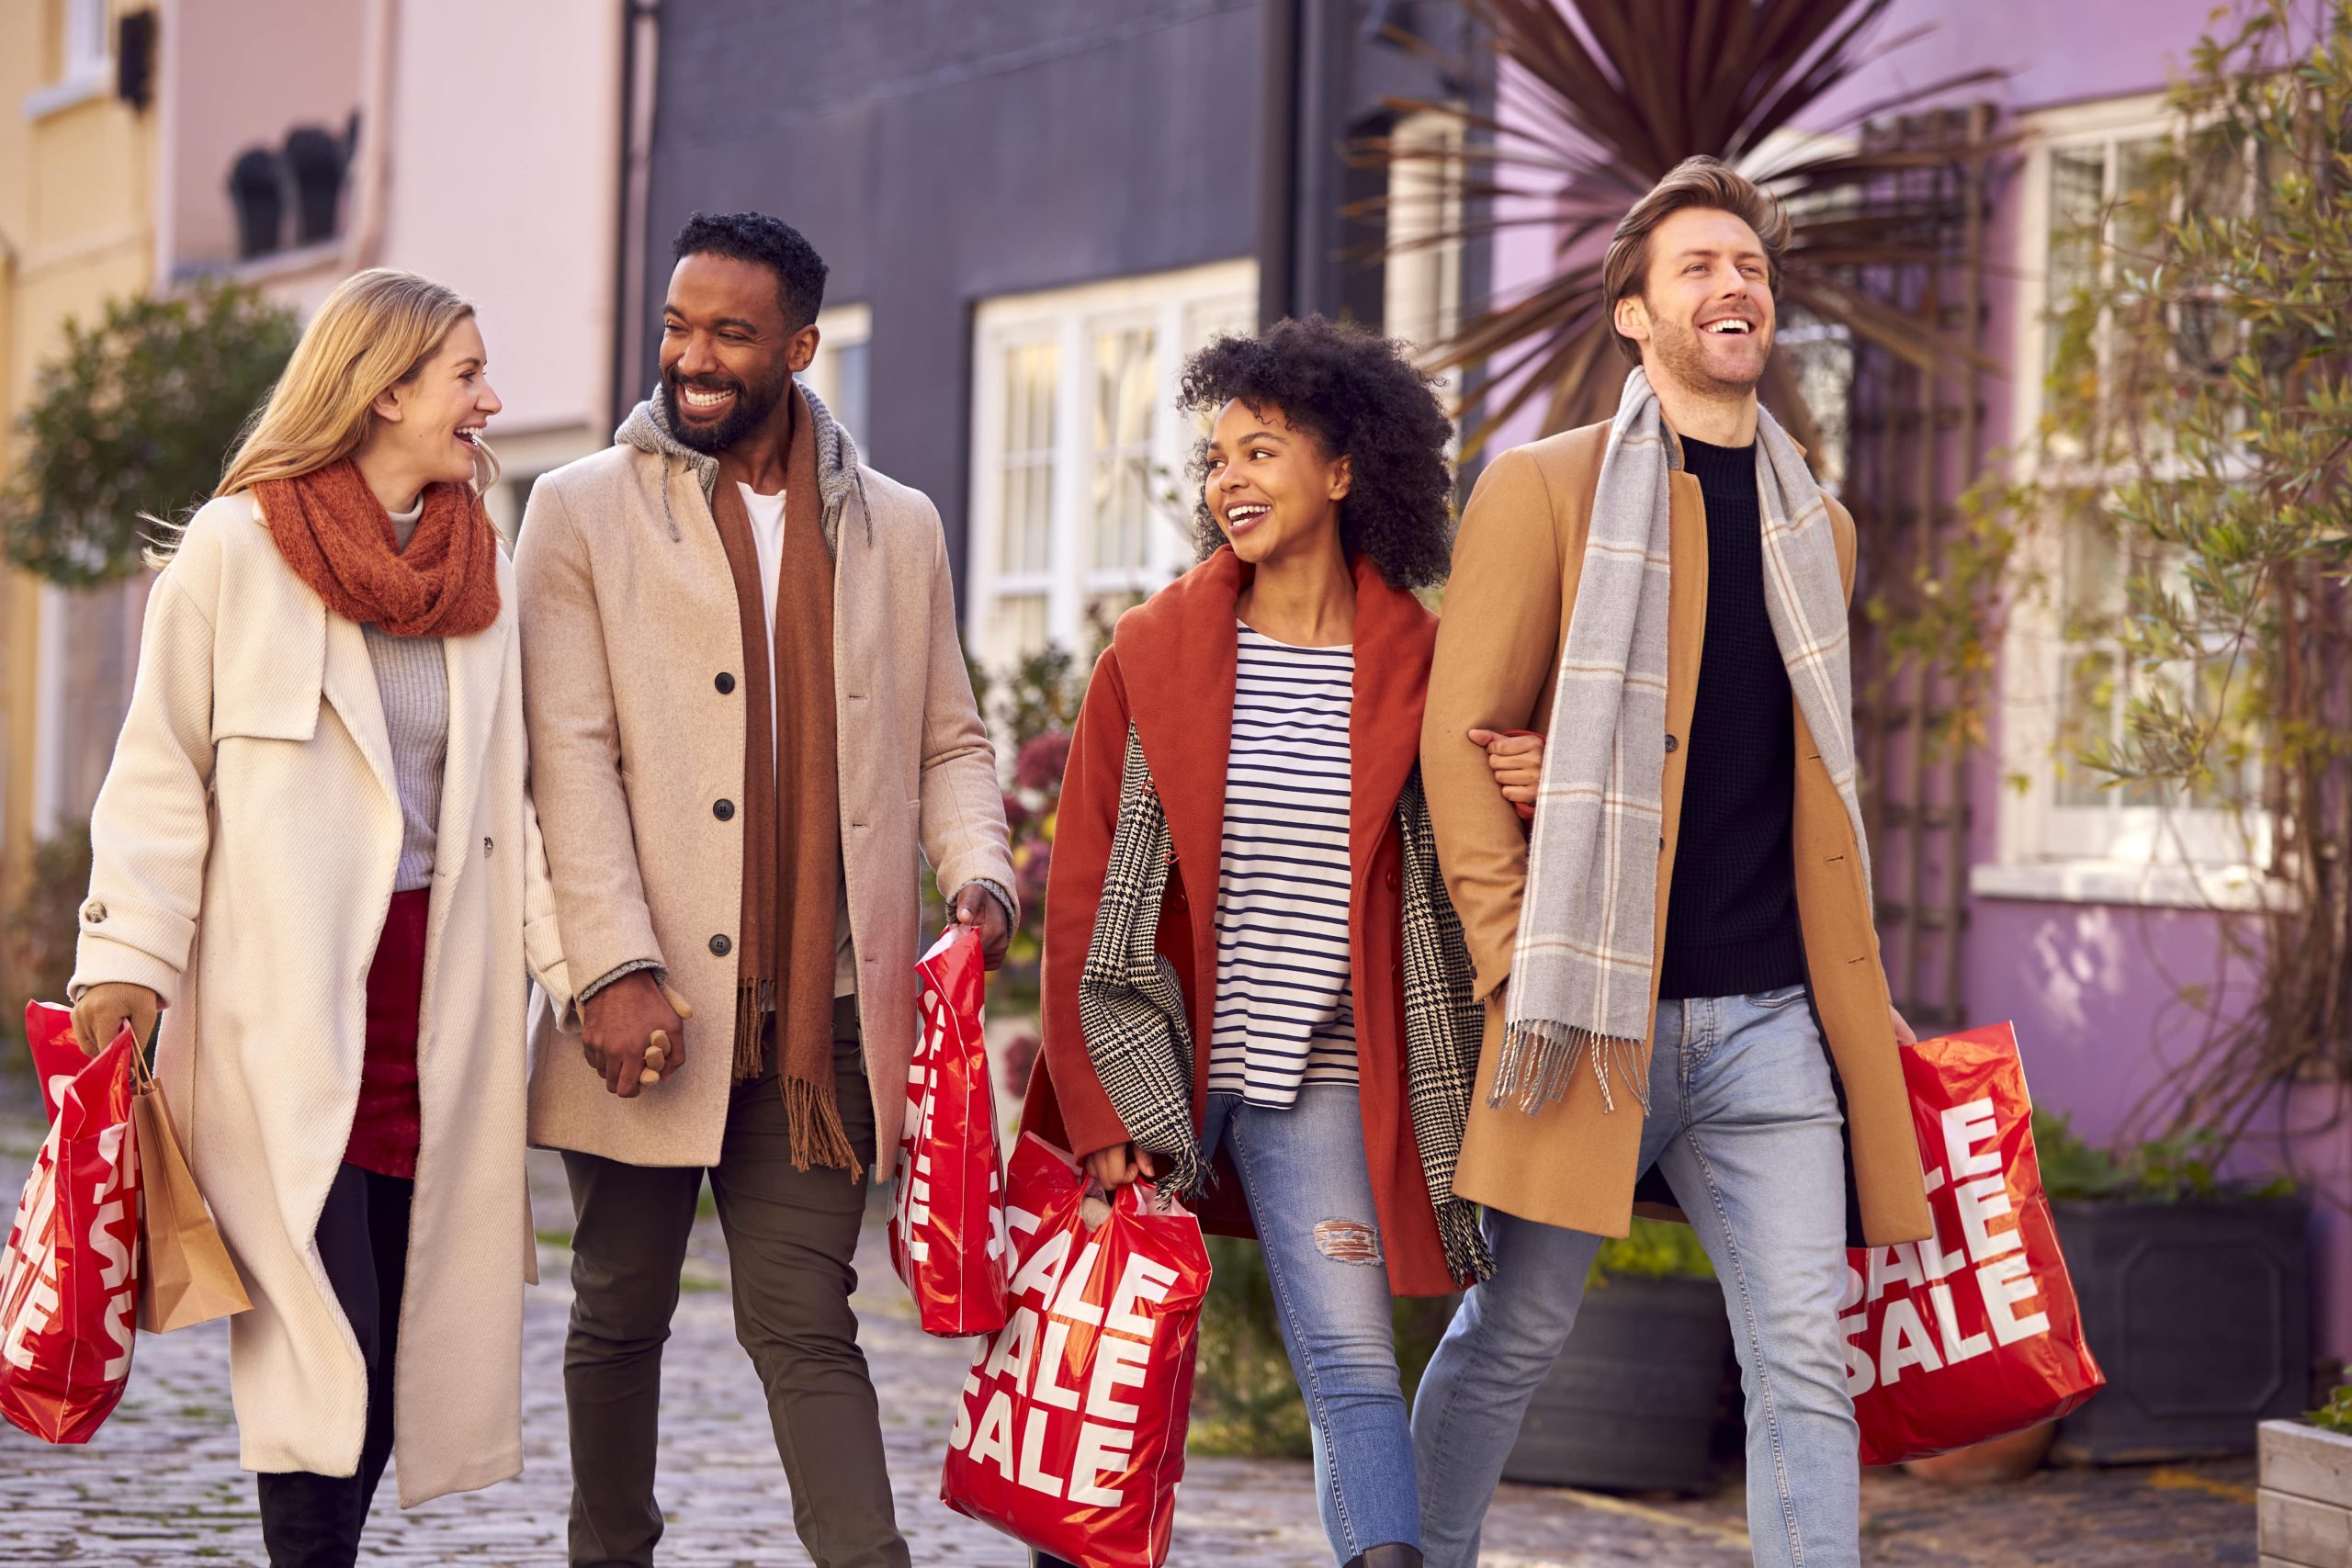 2023 Holiday Spending Survey Shows Impact of Higher Prices on Gift-Giving & Holiday Celebrations